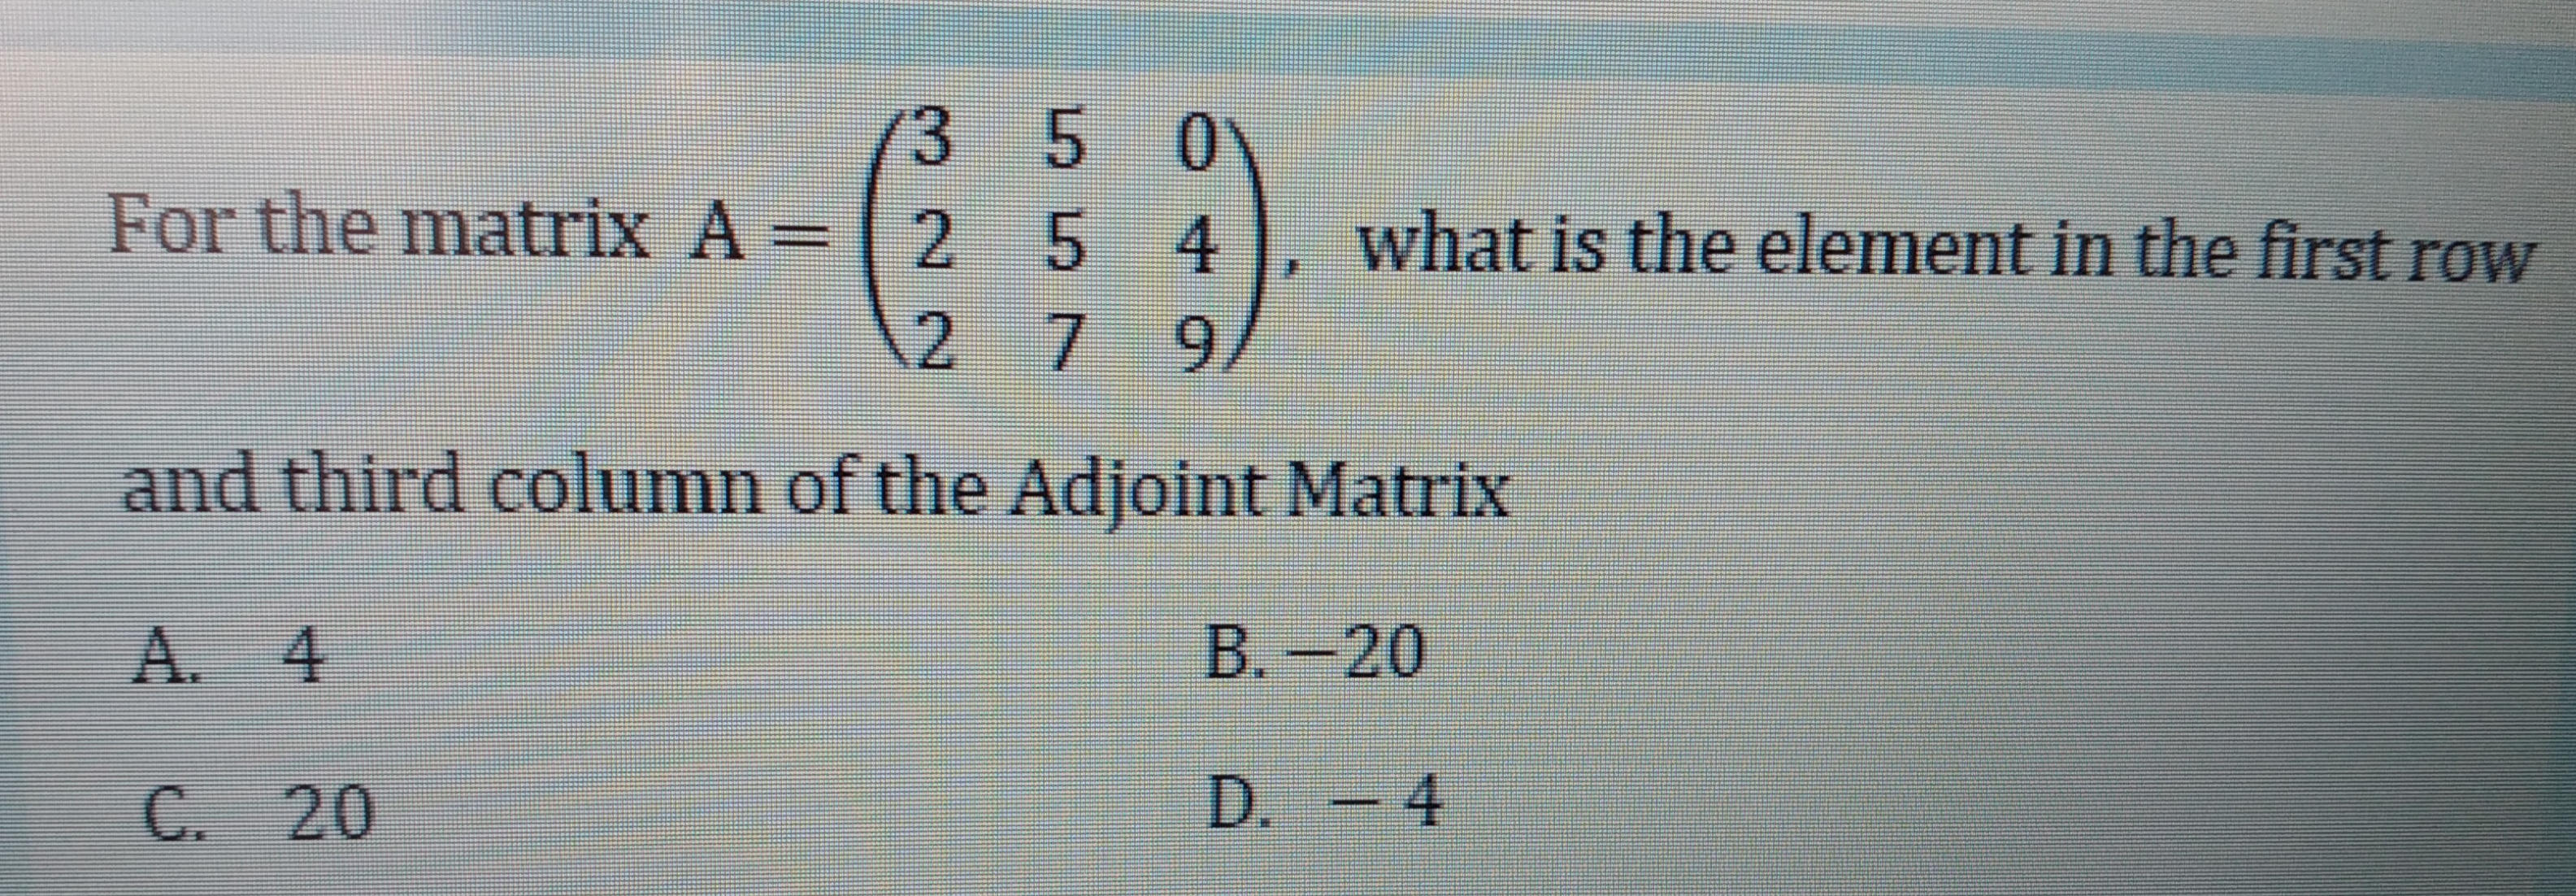 350
For the matrix A =
254
what is the element in the first row
279
and third column of the Adjoint Matrix
A. 4
B.-20
C. 20
D. - 4
